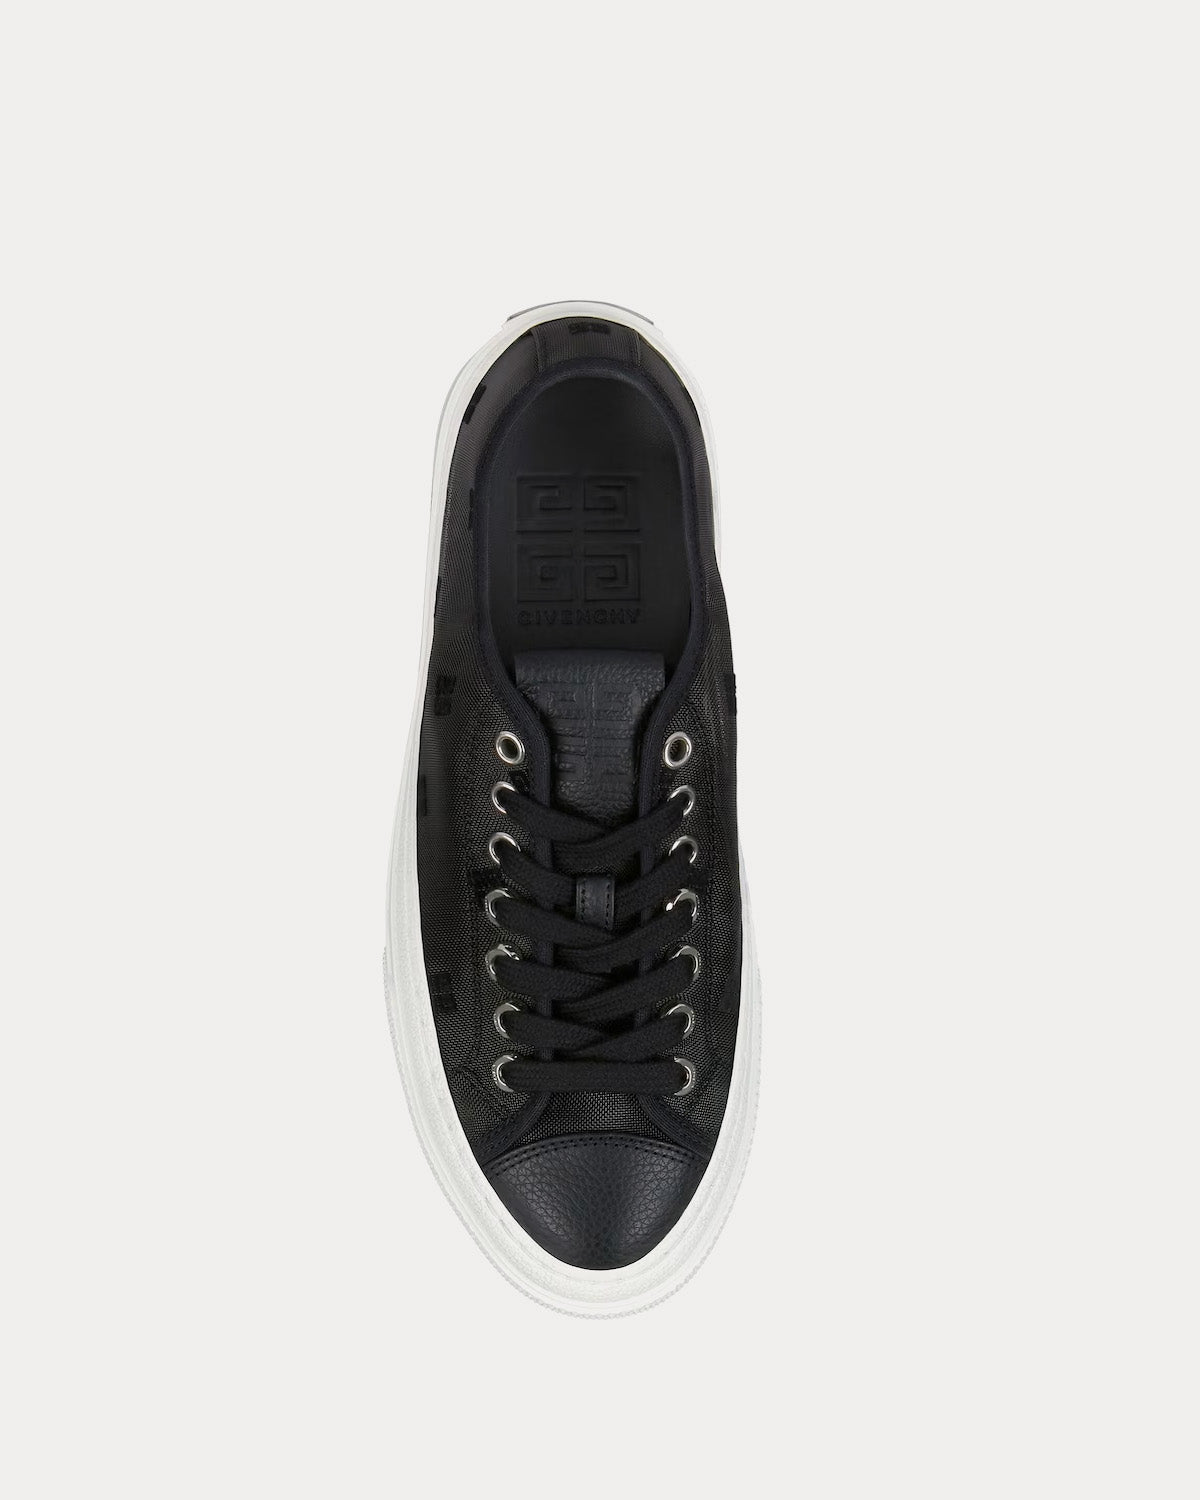 Givenchy - City 4G Transparent Mesh Black / White Low Top Sneakers